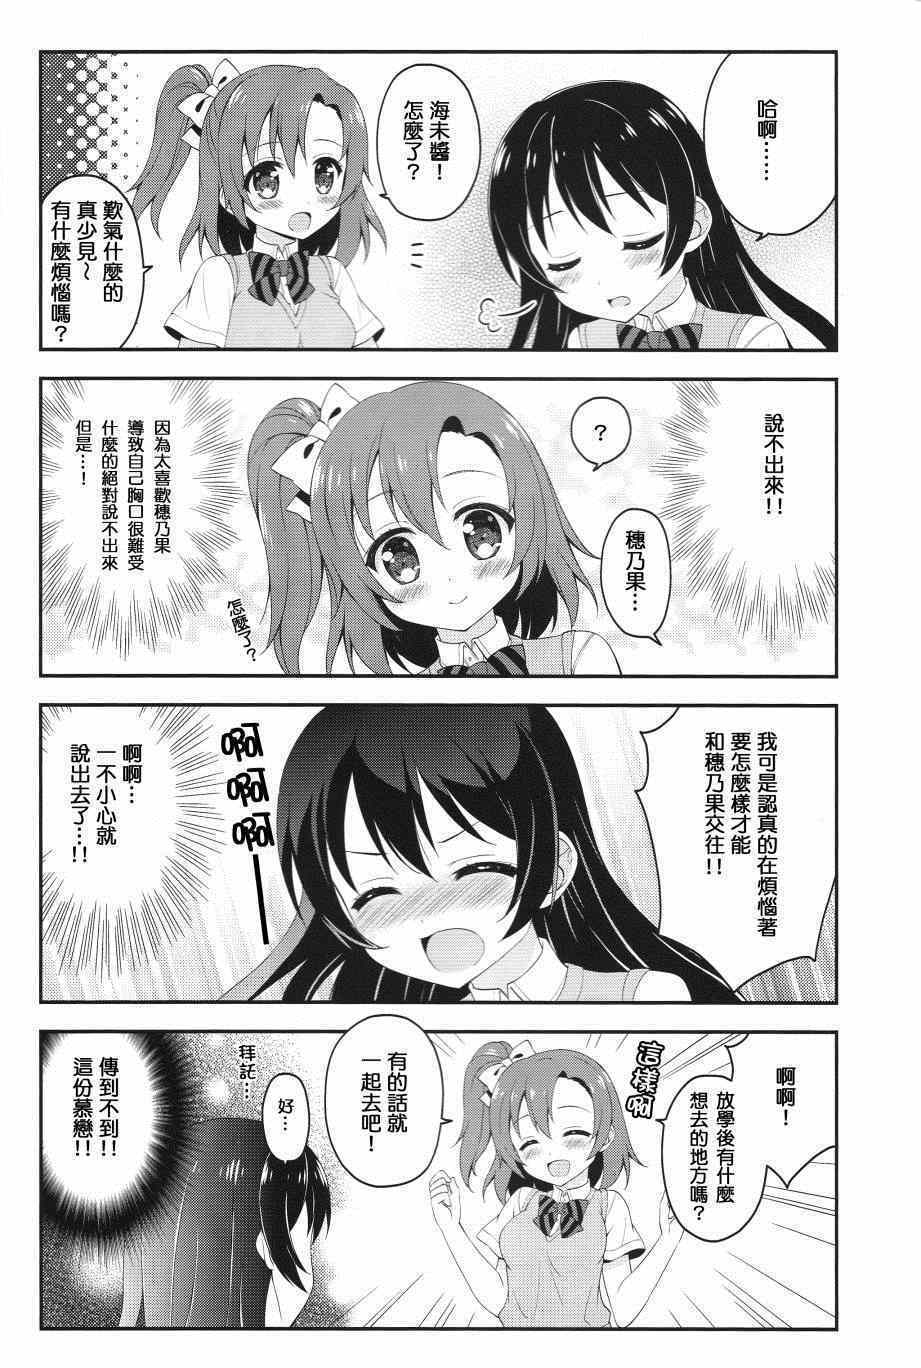 《LoveLive》漫画 COLORFUL DAYS